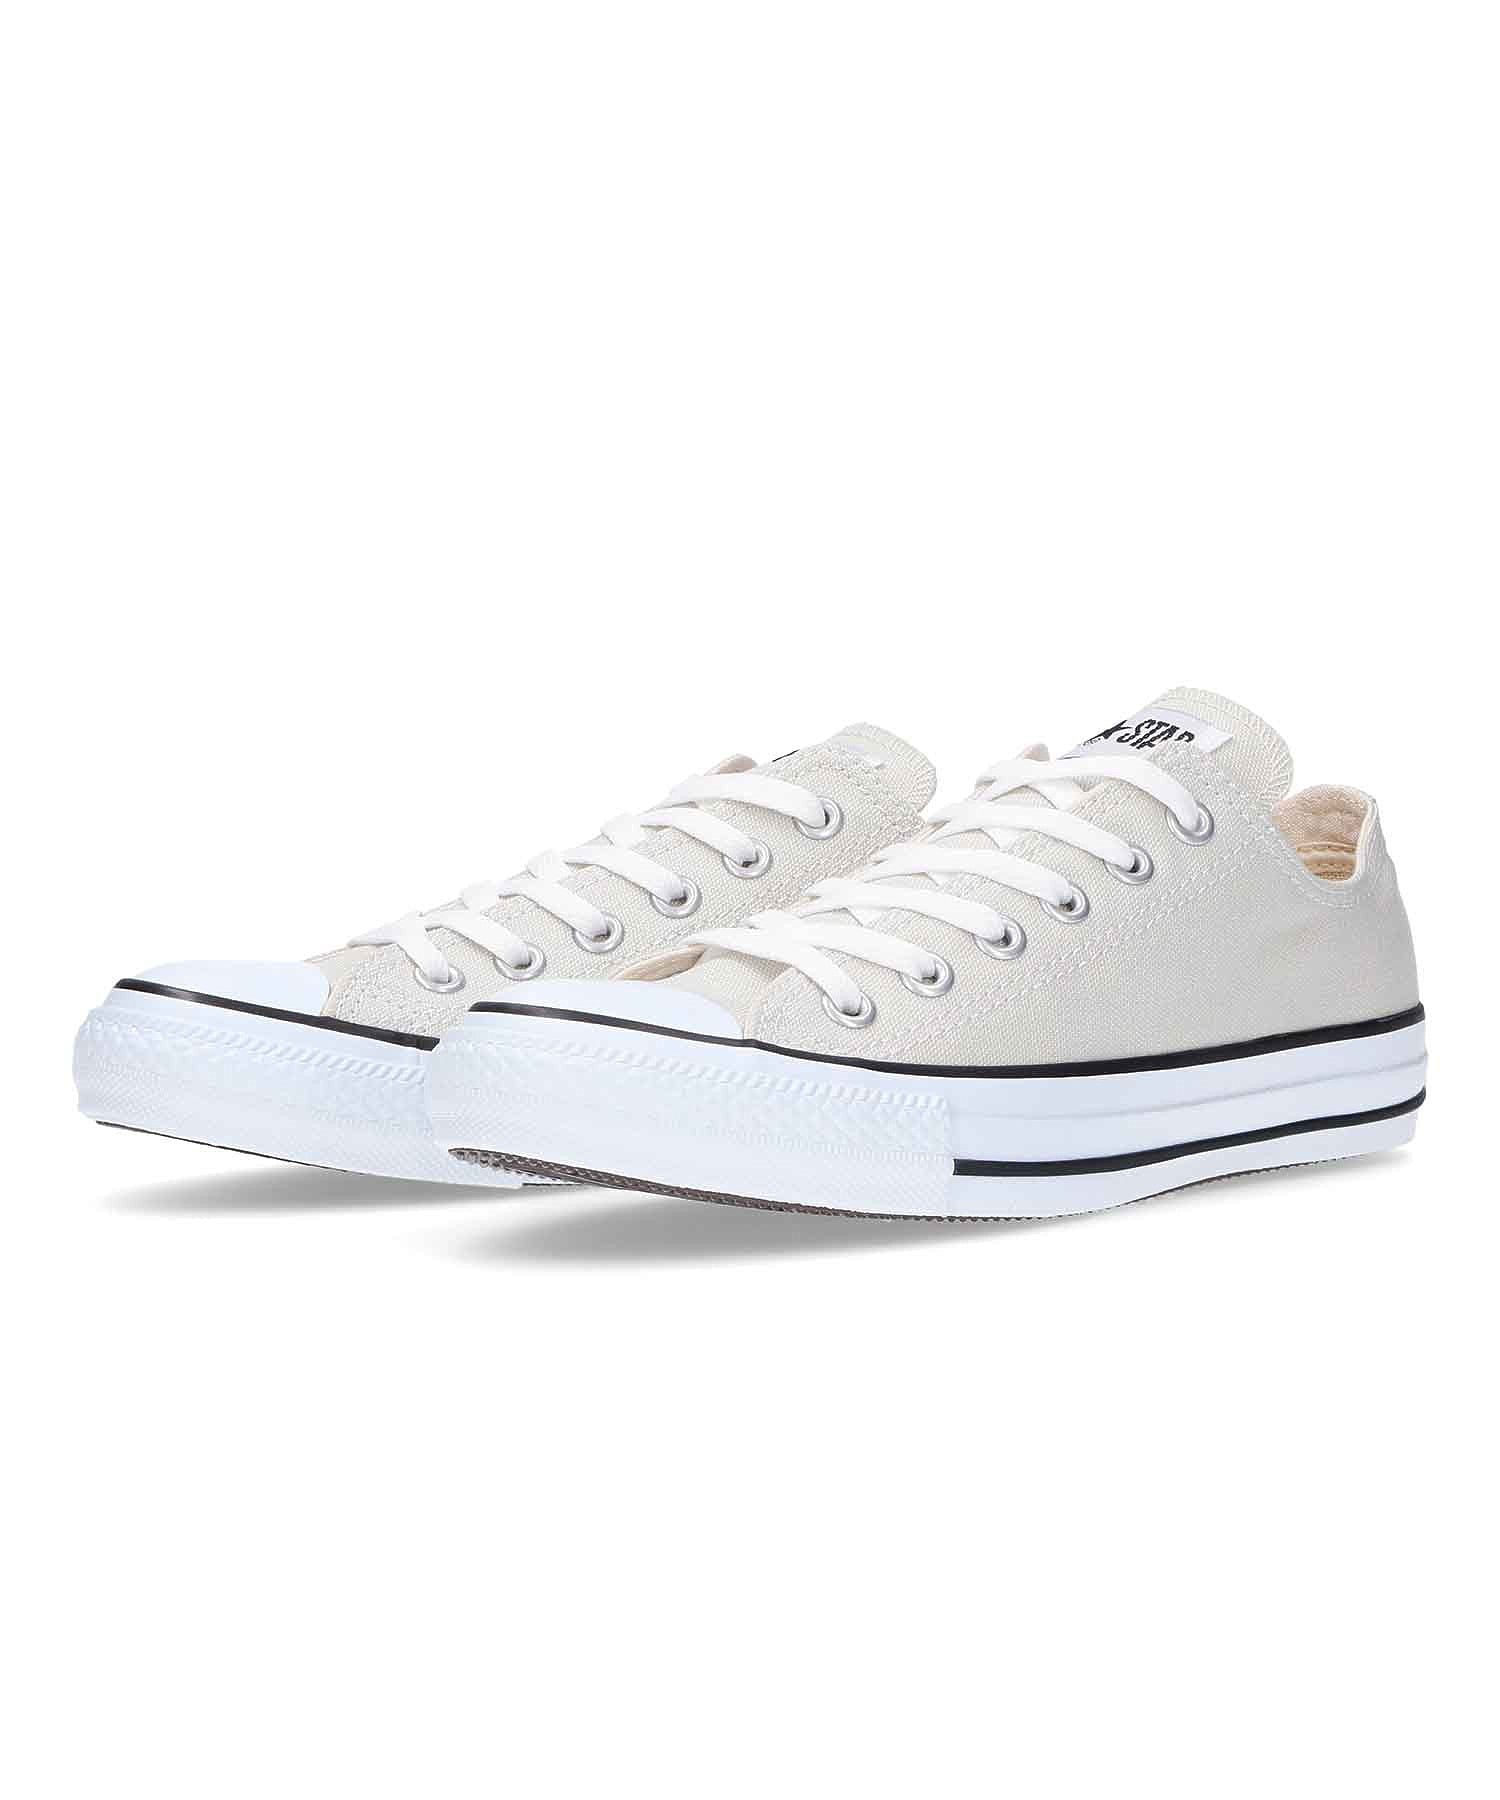 CONVERSE /コンバース/ Canvas All Star Colors OX 31306150